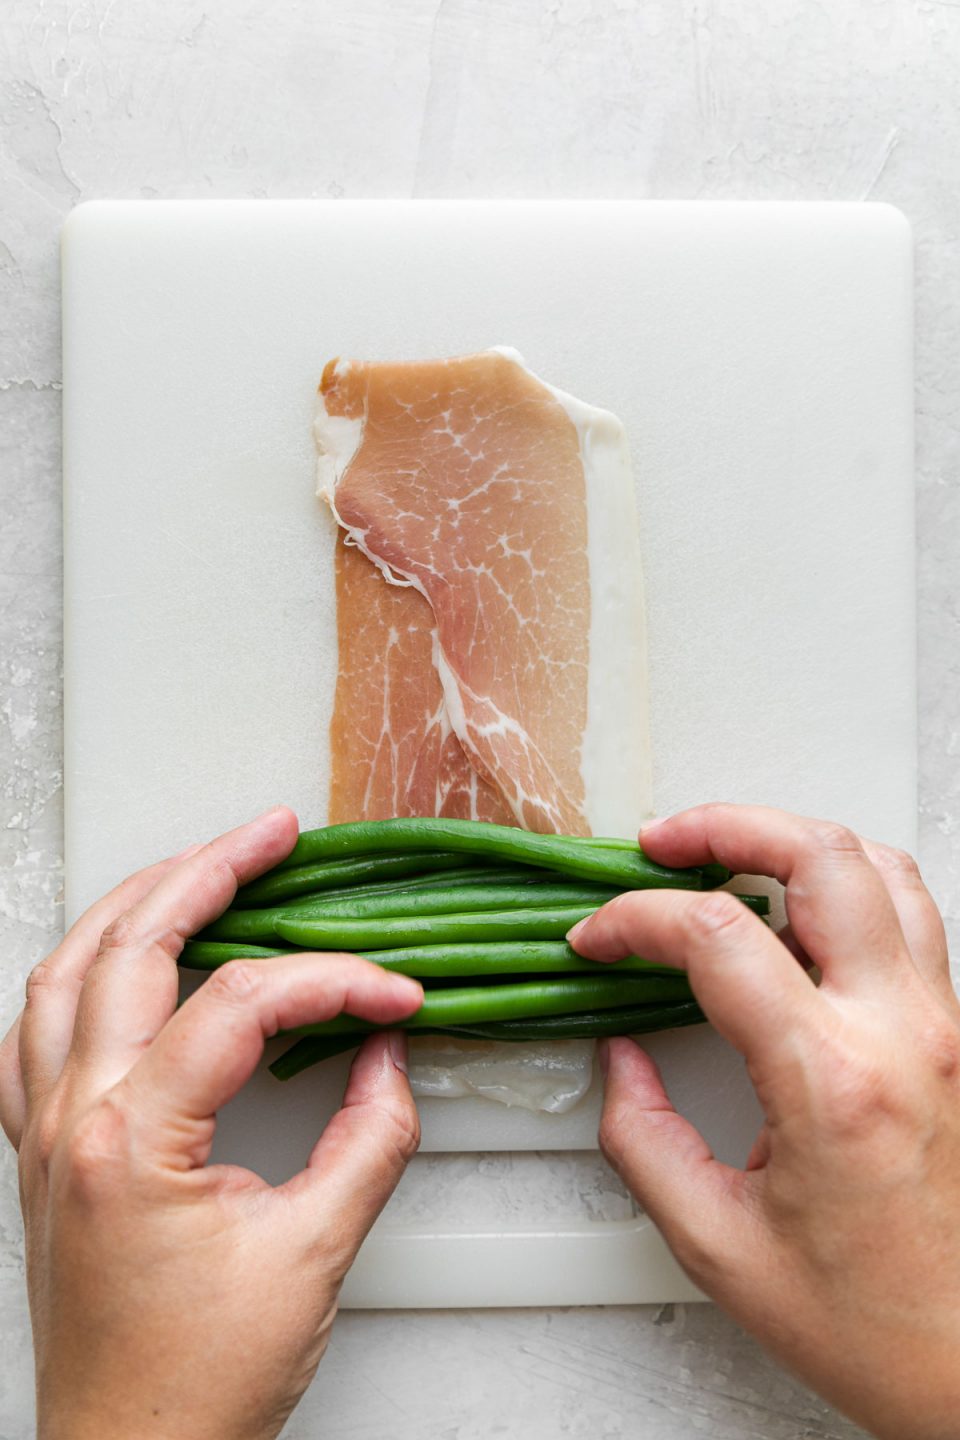 A woman's hands work to gather a pile of neatly arranged green beans running in the same direction and place the pile at the end of a single piece of prosciutto that is resting atop a white cutting board. The cutting board sits atop a creamy white plaster surface.